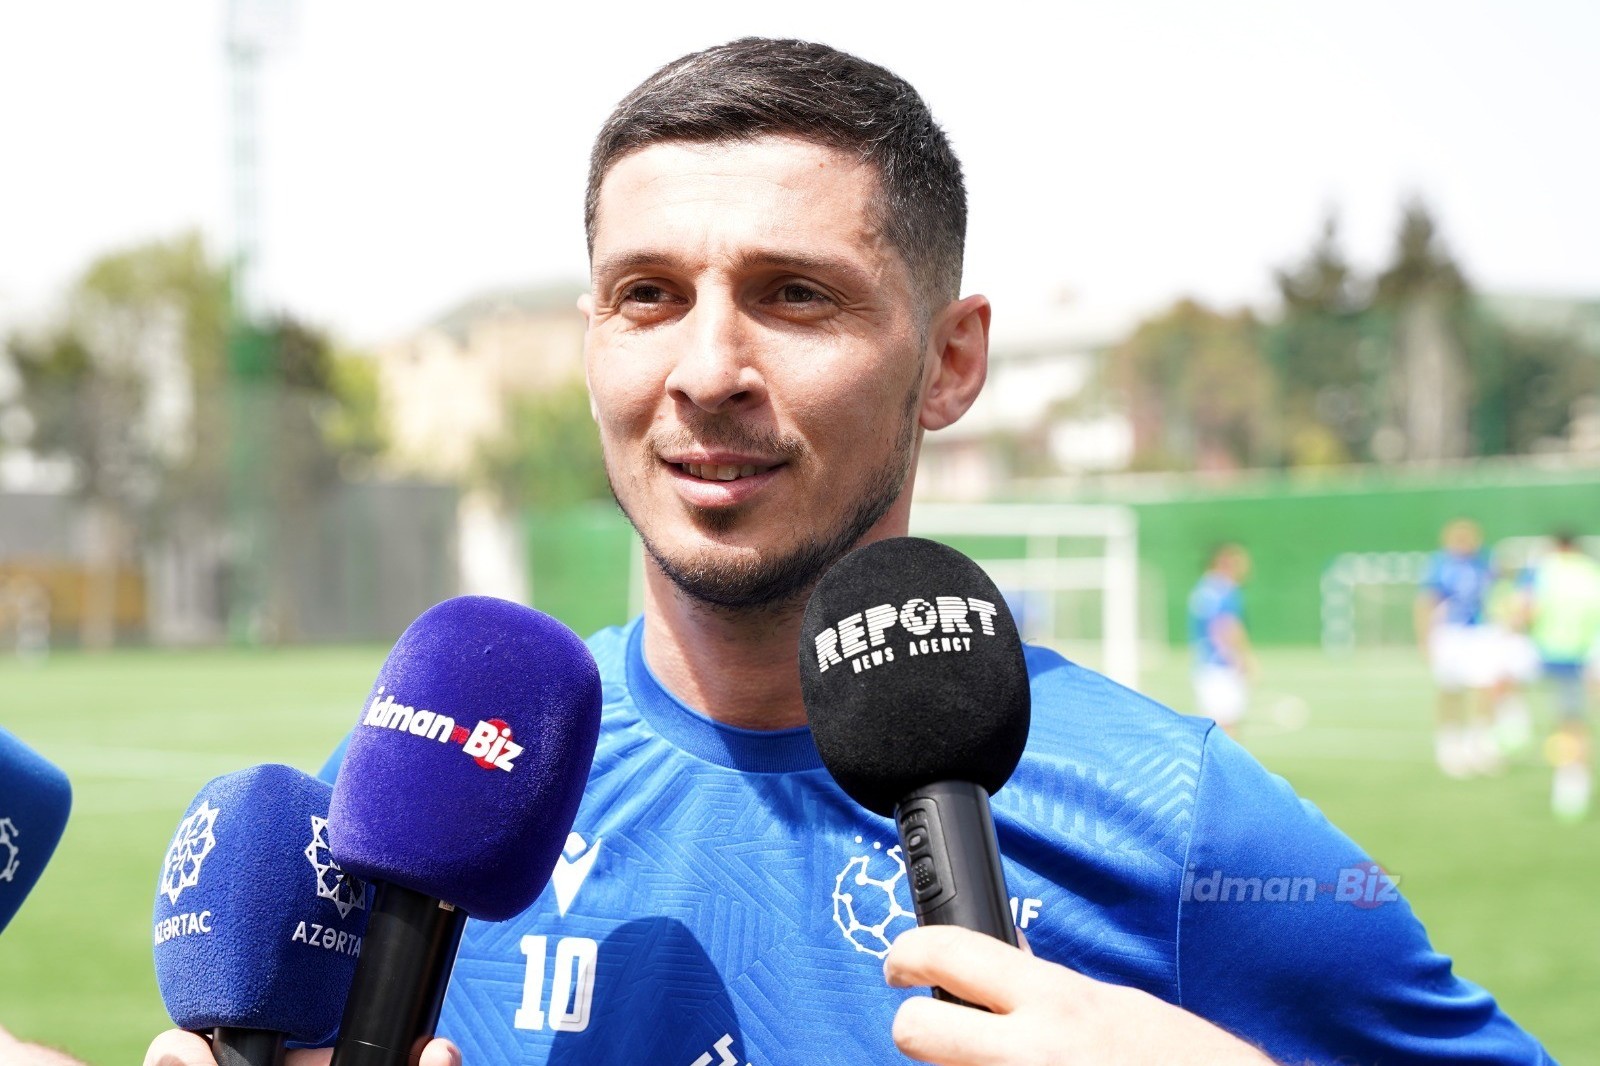 Seymur Mammadov: "Whoever scored the goal, being champion is what really matters" - VIDEO